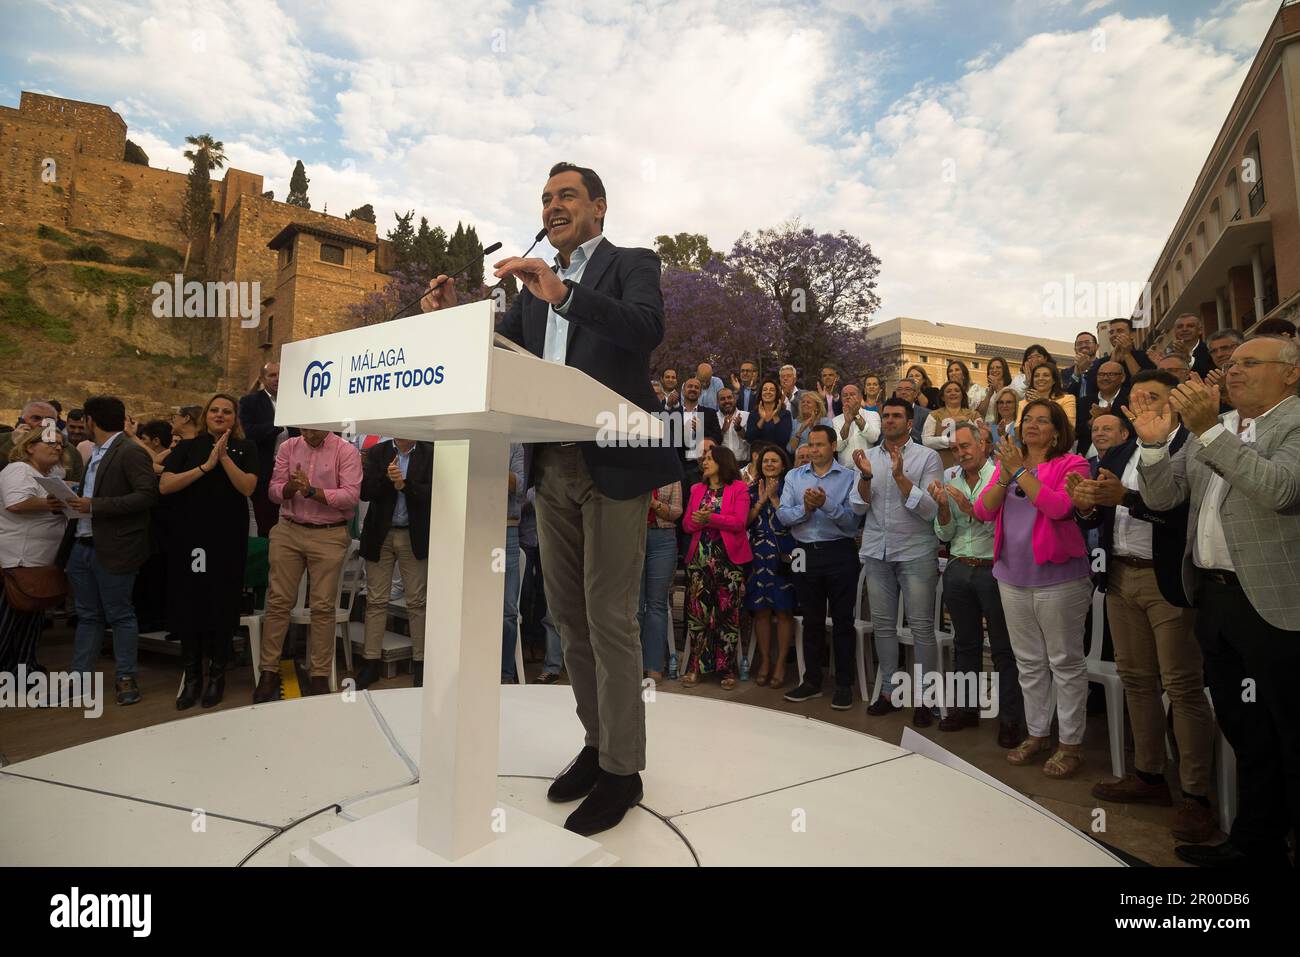 Malaga, Spain. 05th May, 2023. Andalusian regional president Juanma Moreno is seen delivering a speech as he takes part during an electoral pre-campaign event. The president of the Spanish Popular Party, Alberto Nunez Feijoo, has begun a tour of pre-election events in several cities across the country to support the Popular Party's candidates for the upcoming municipal elections. The results of the municipal elections on May 28th could influence the vote in the Spanish general elections at the end of the year. Credit: SOPA Images Limited/Alamy Live News Stock Photo